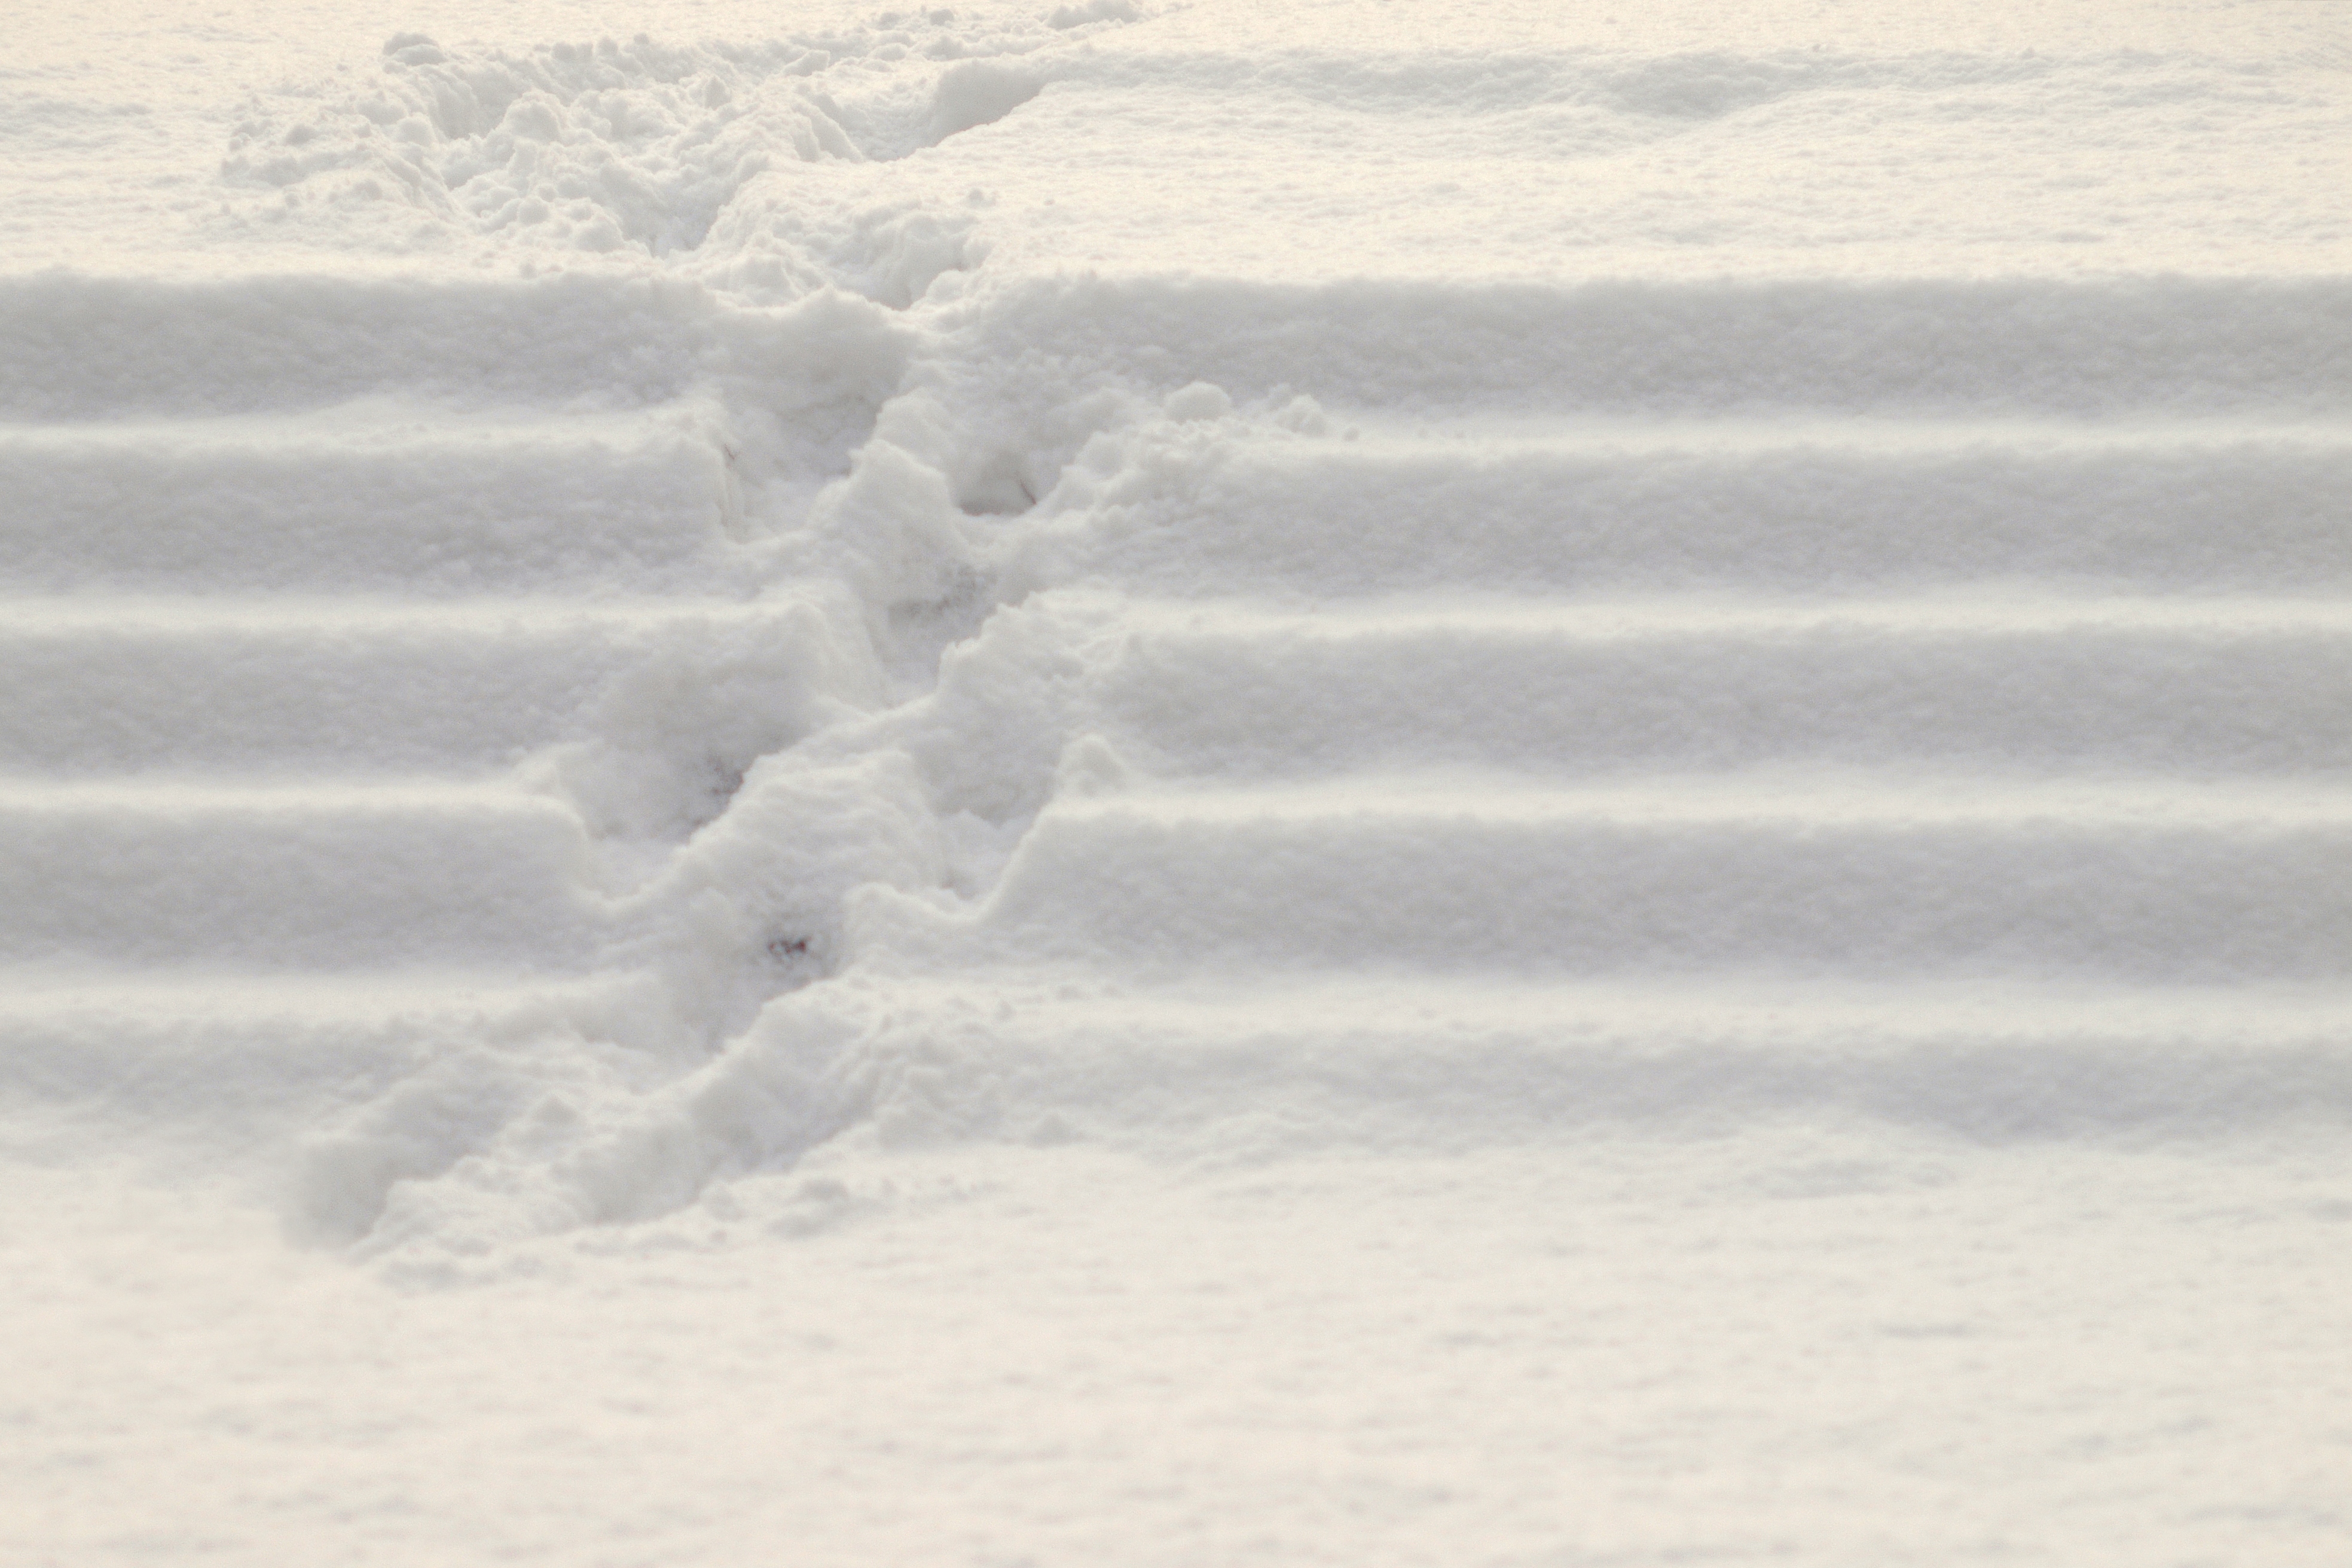 Appellate Court Holds School Not Liable for Snowy Slip-and-Fall ...